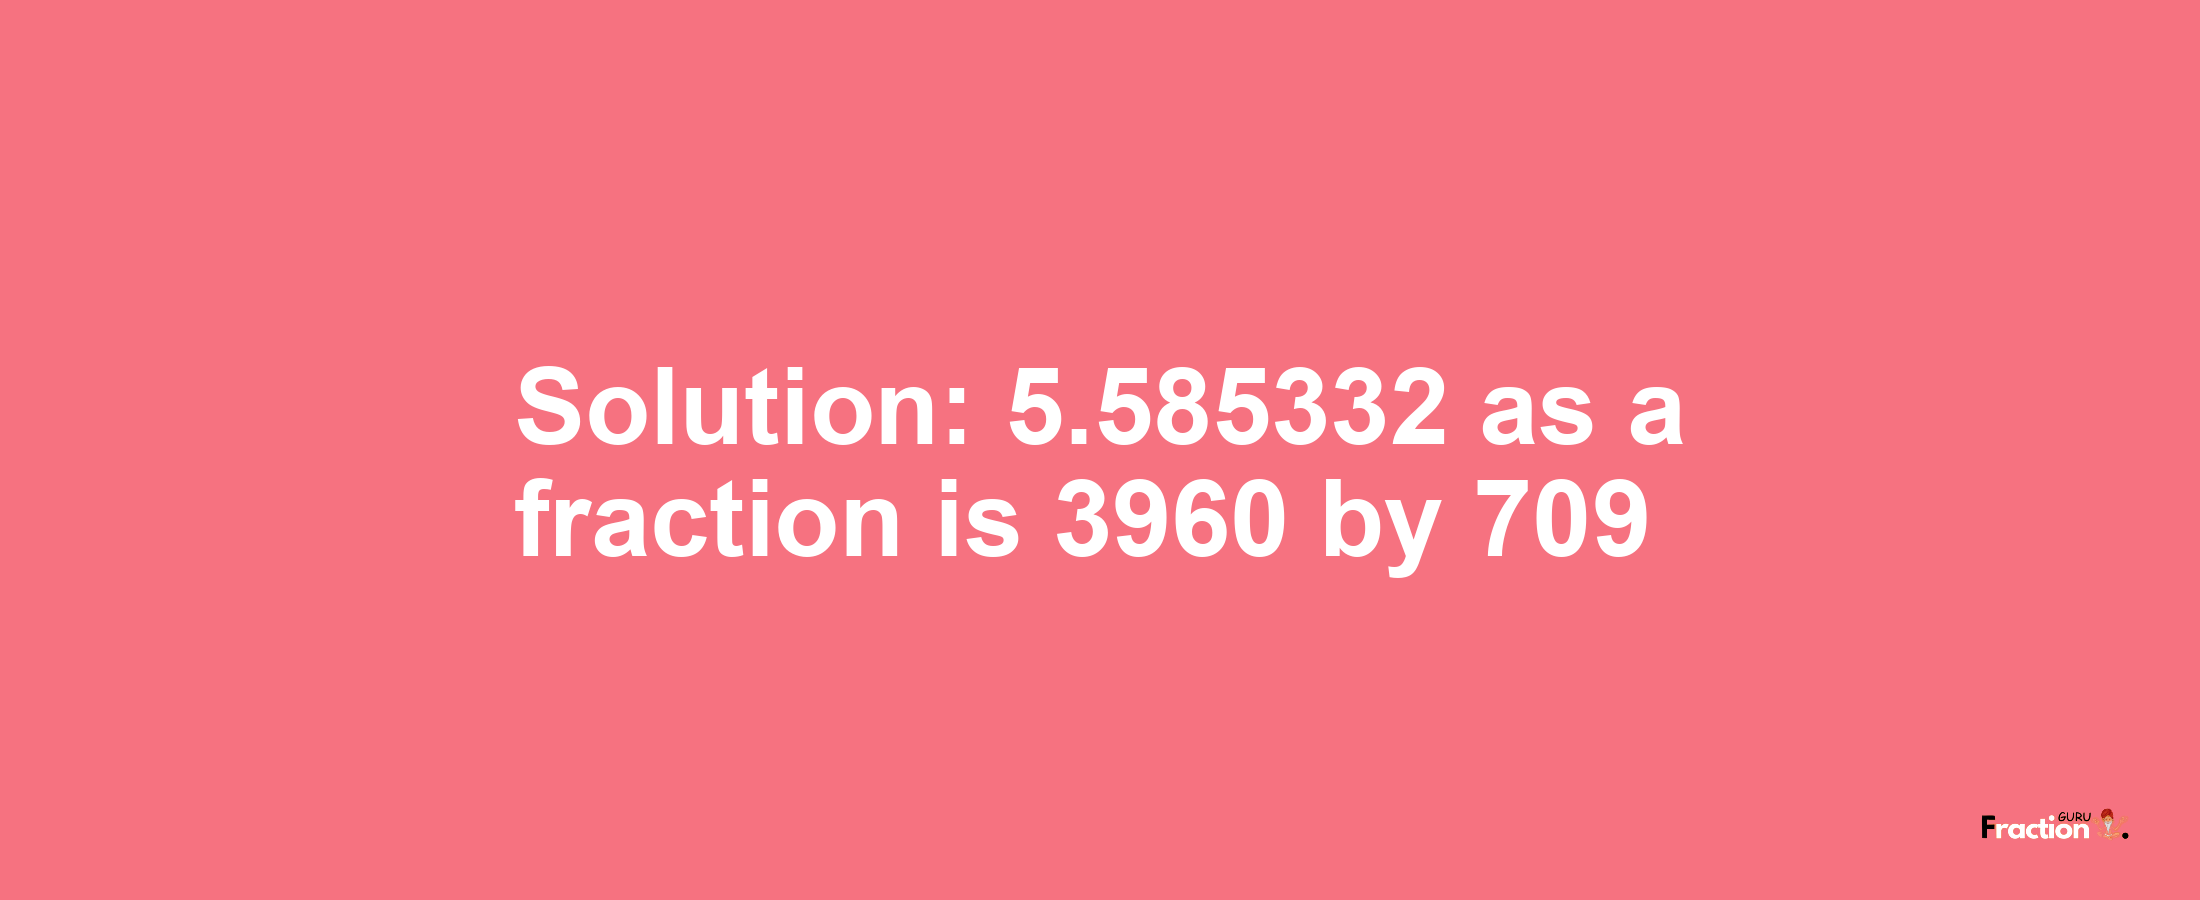 Solution:5.585332 as a fraction is 3960/709